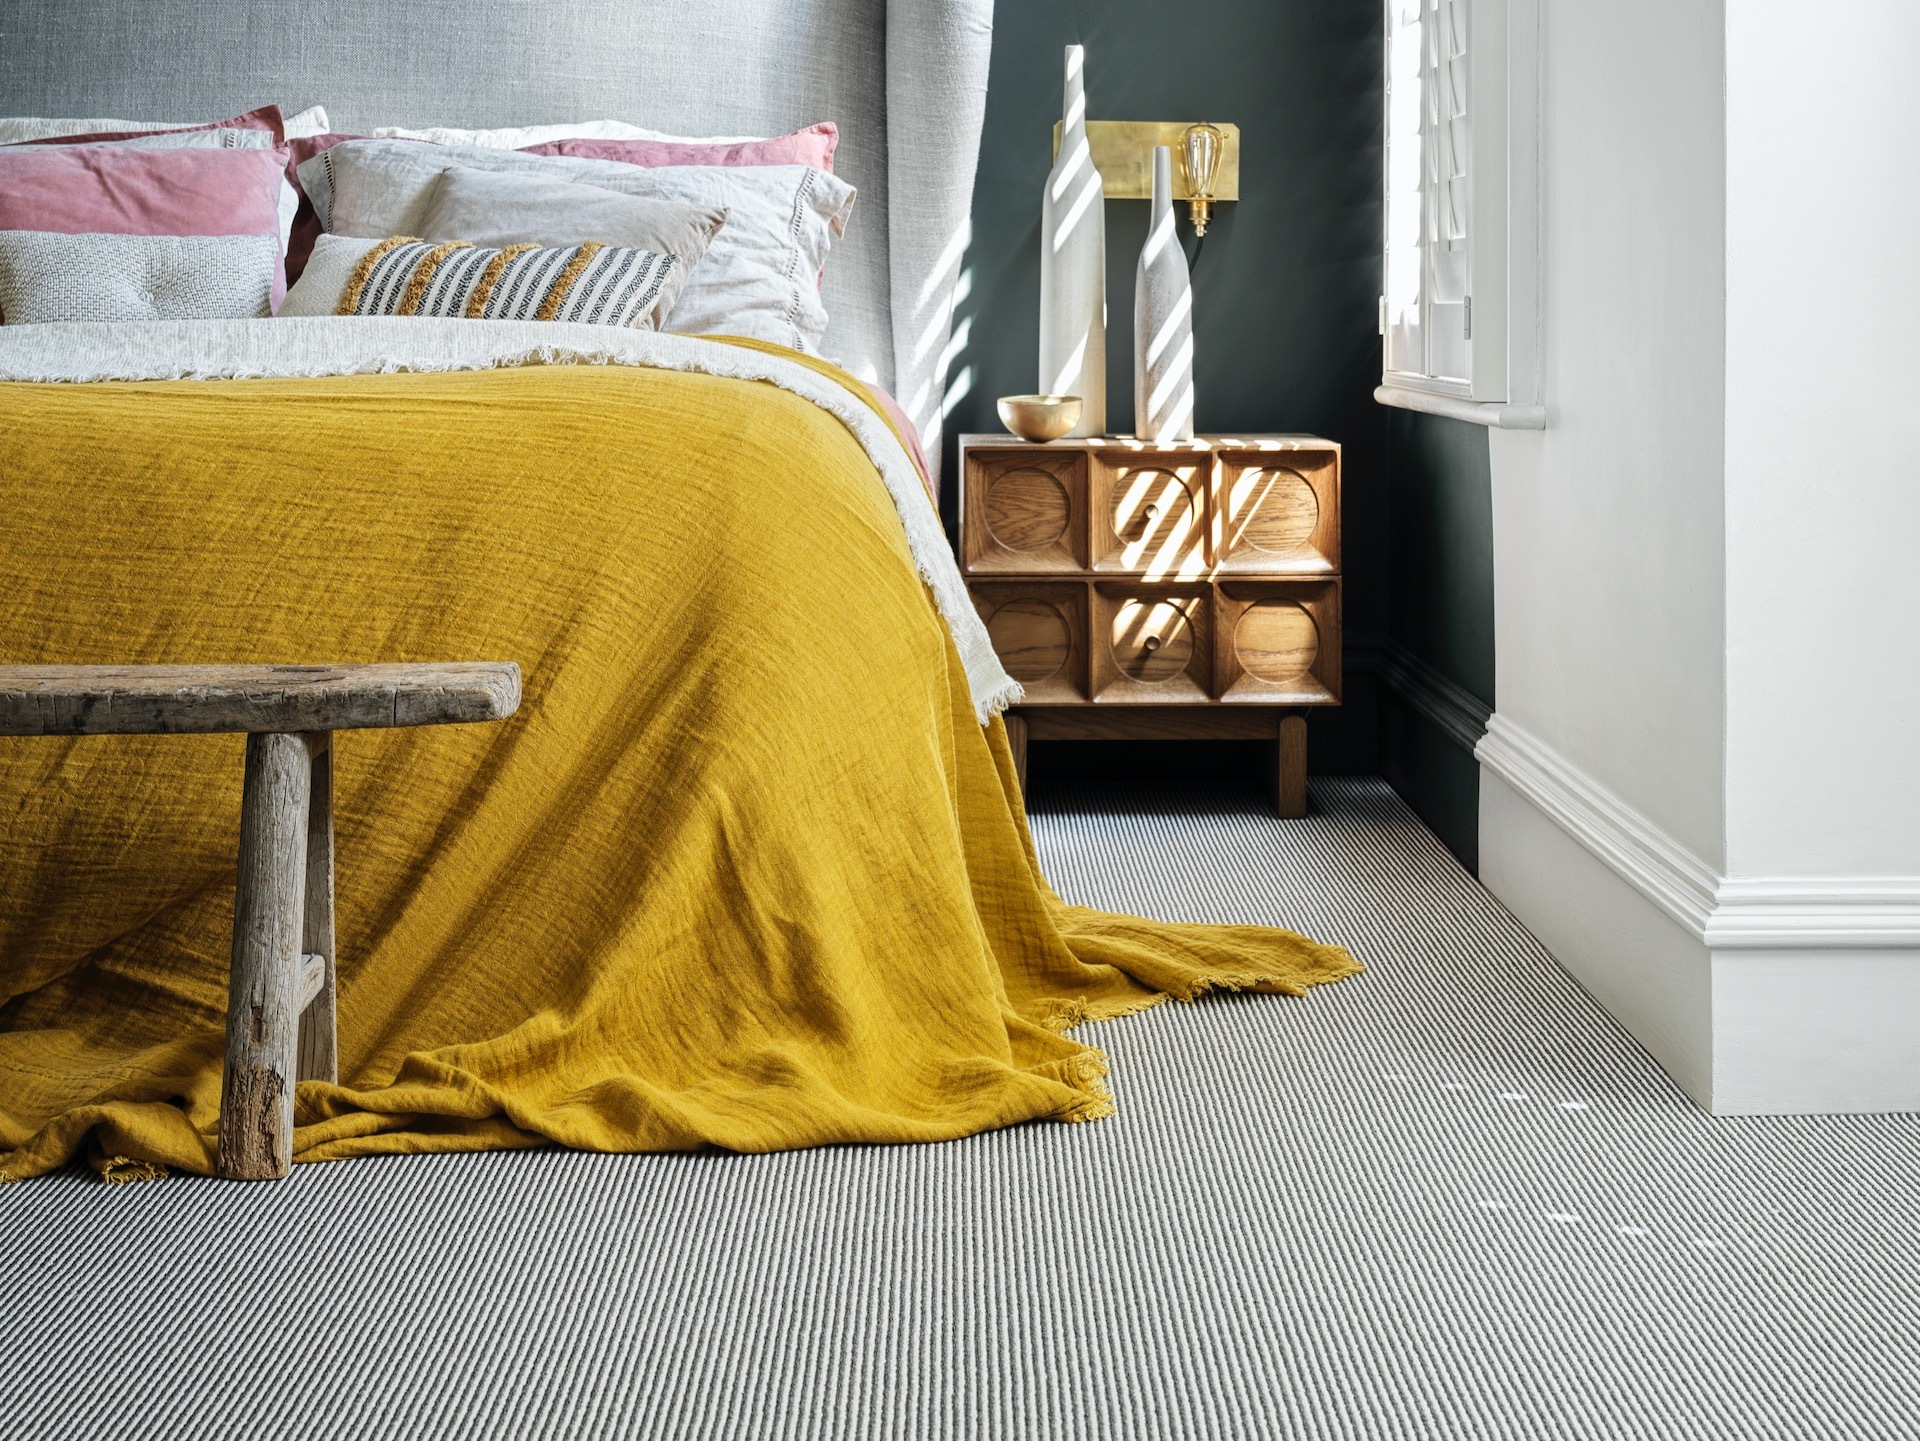 Finely striped carpet in bedroom with mustard bedspread